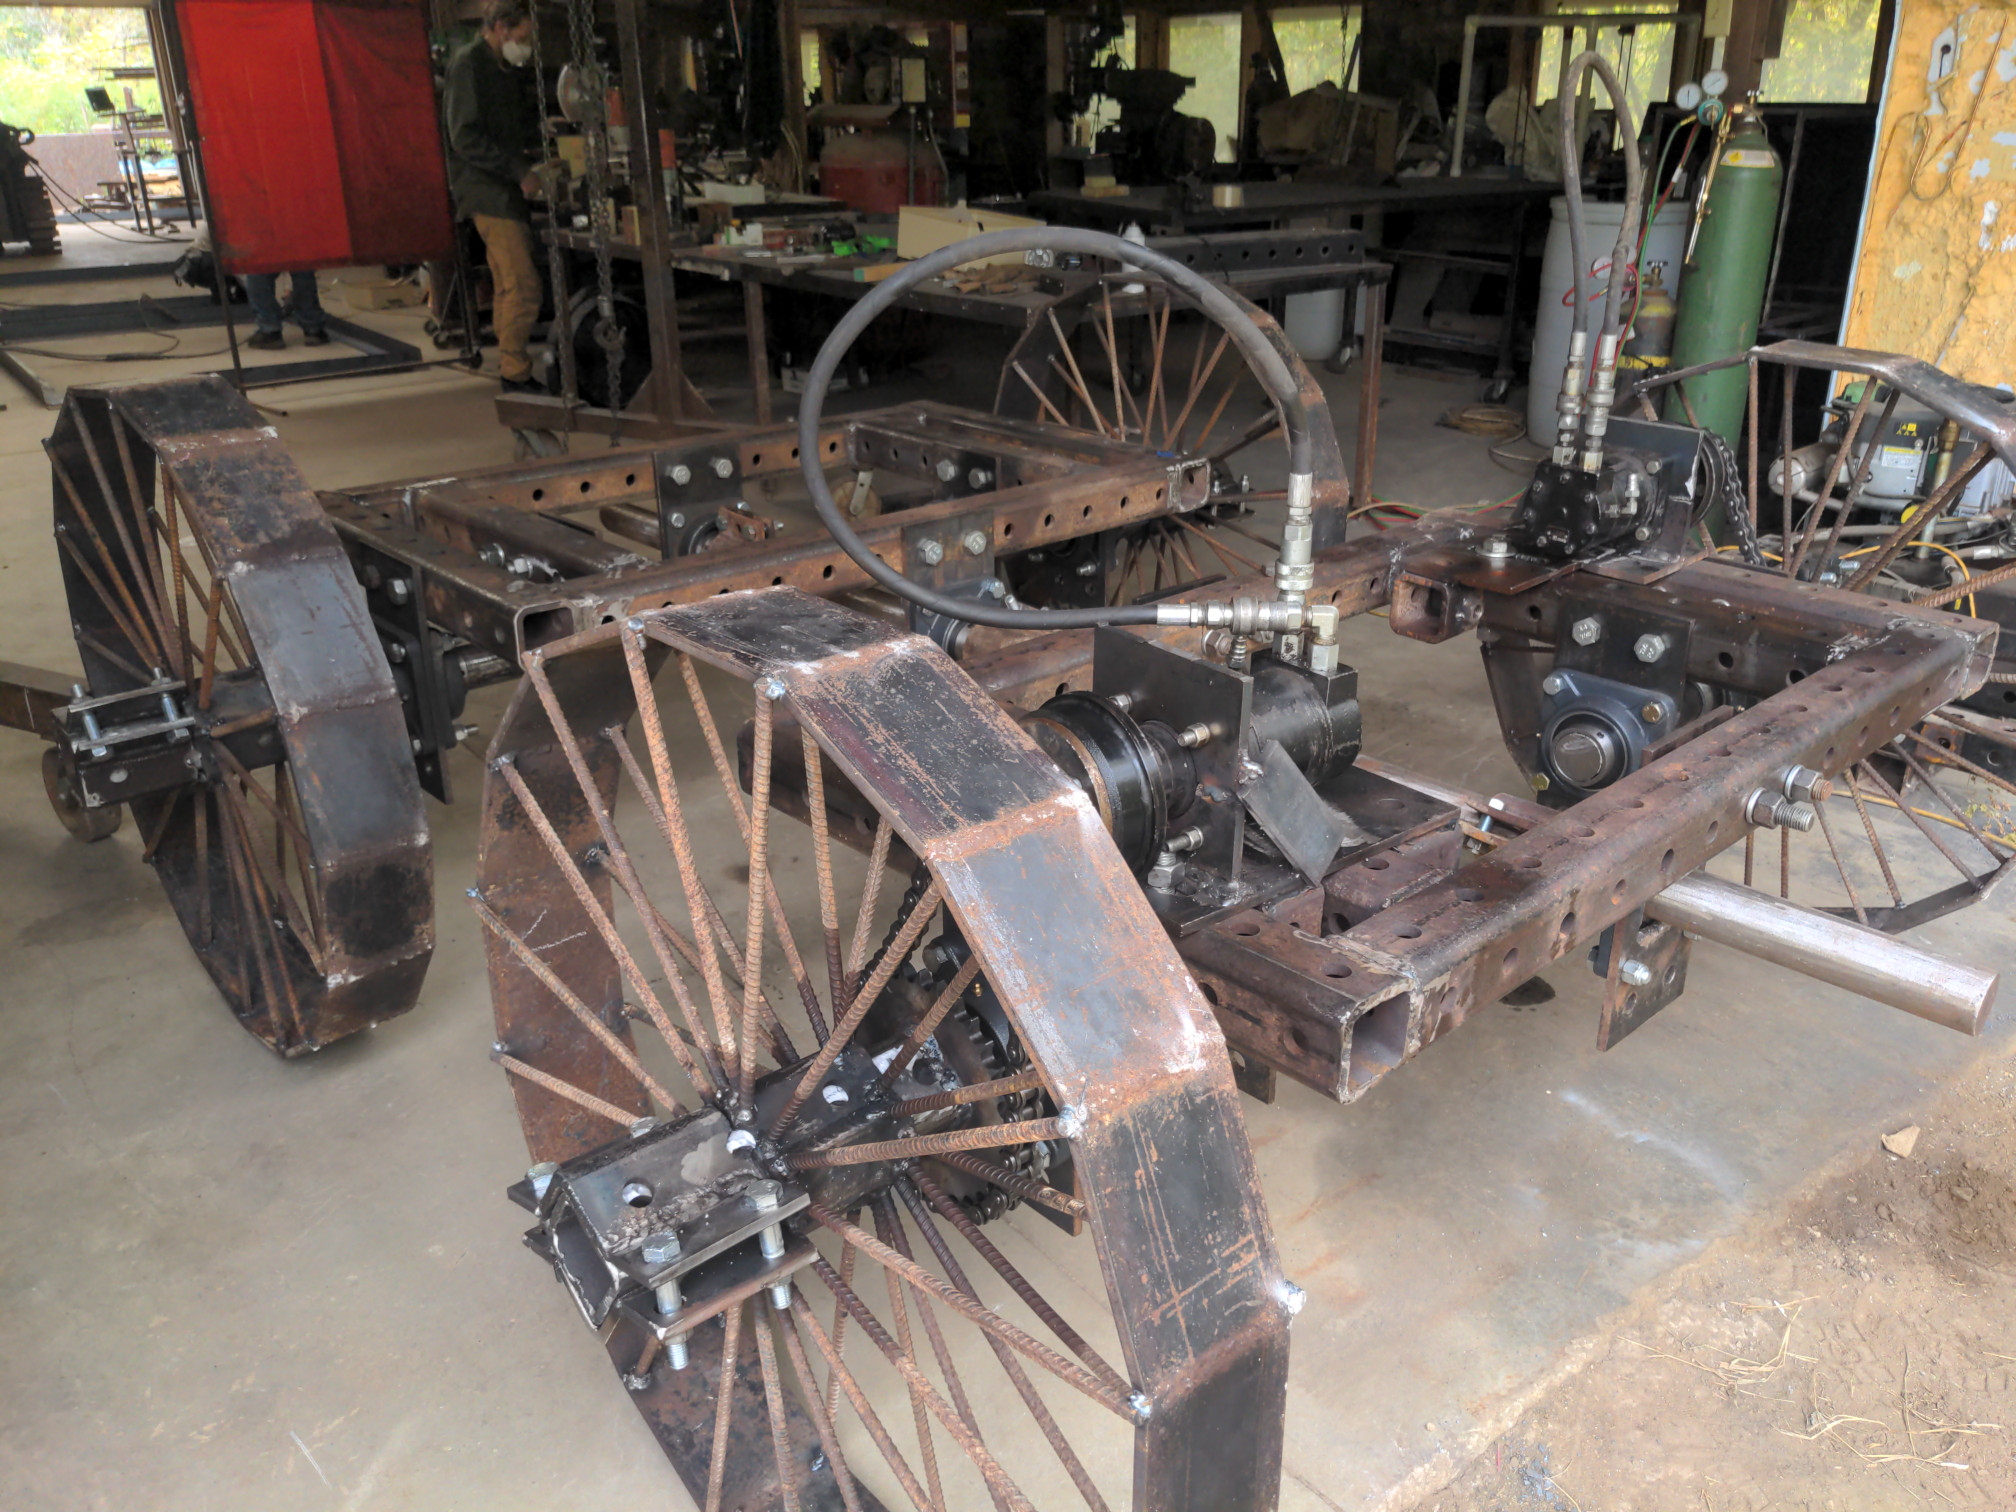 Tractor wheels with rebar spokes